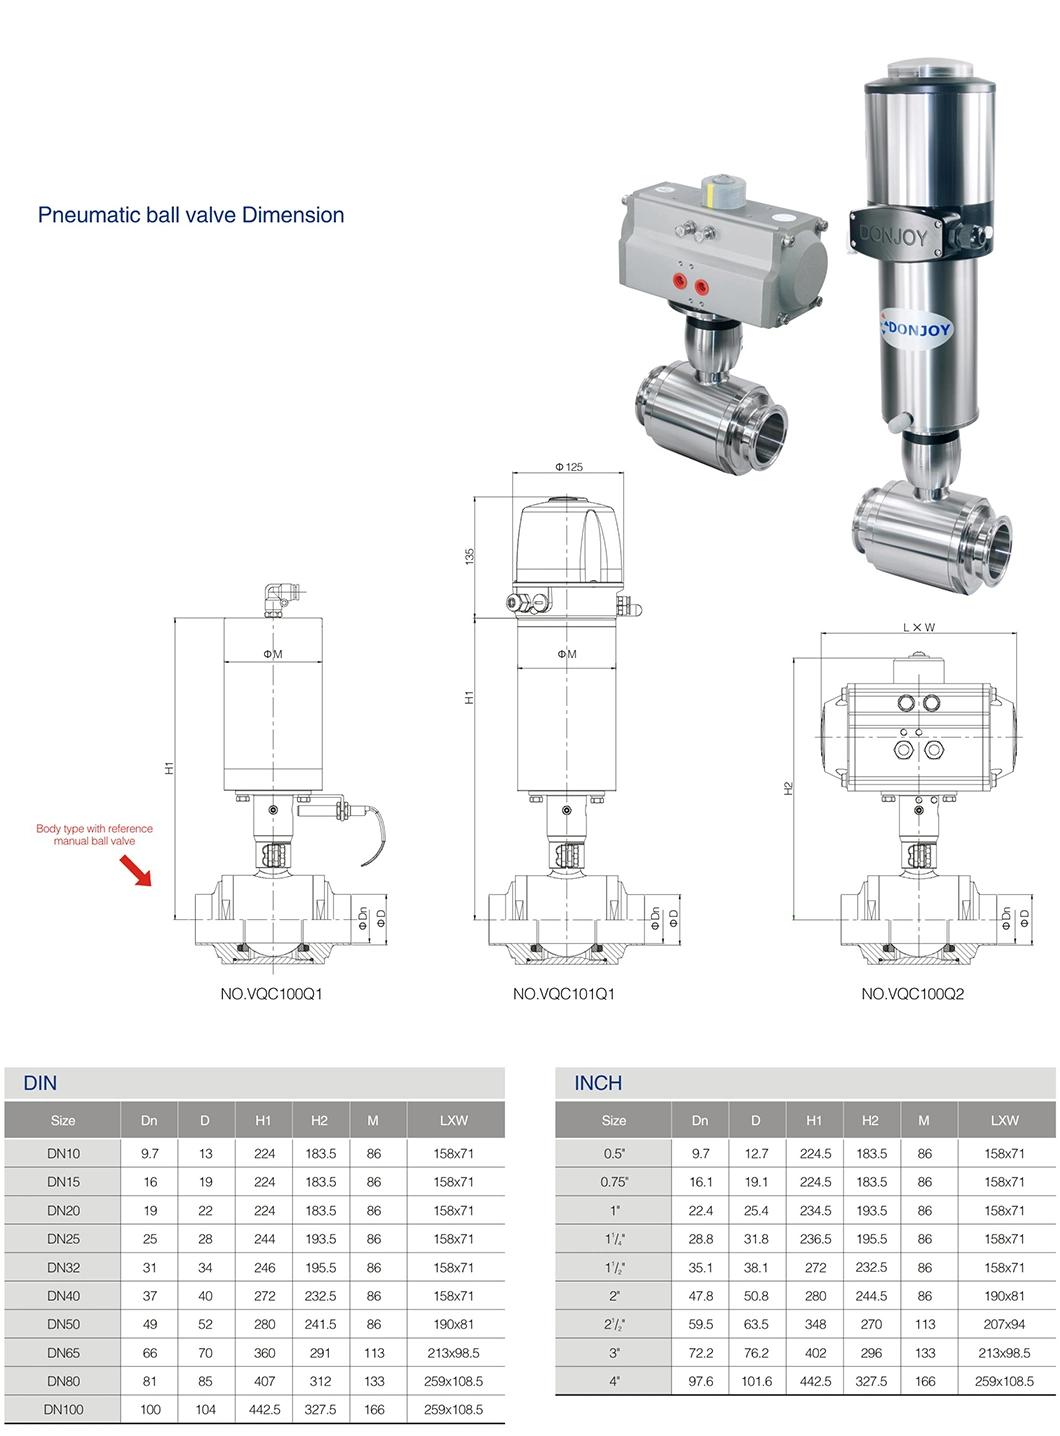 Us 3A Donjoy Sanitary Ball Valve with Control